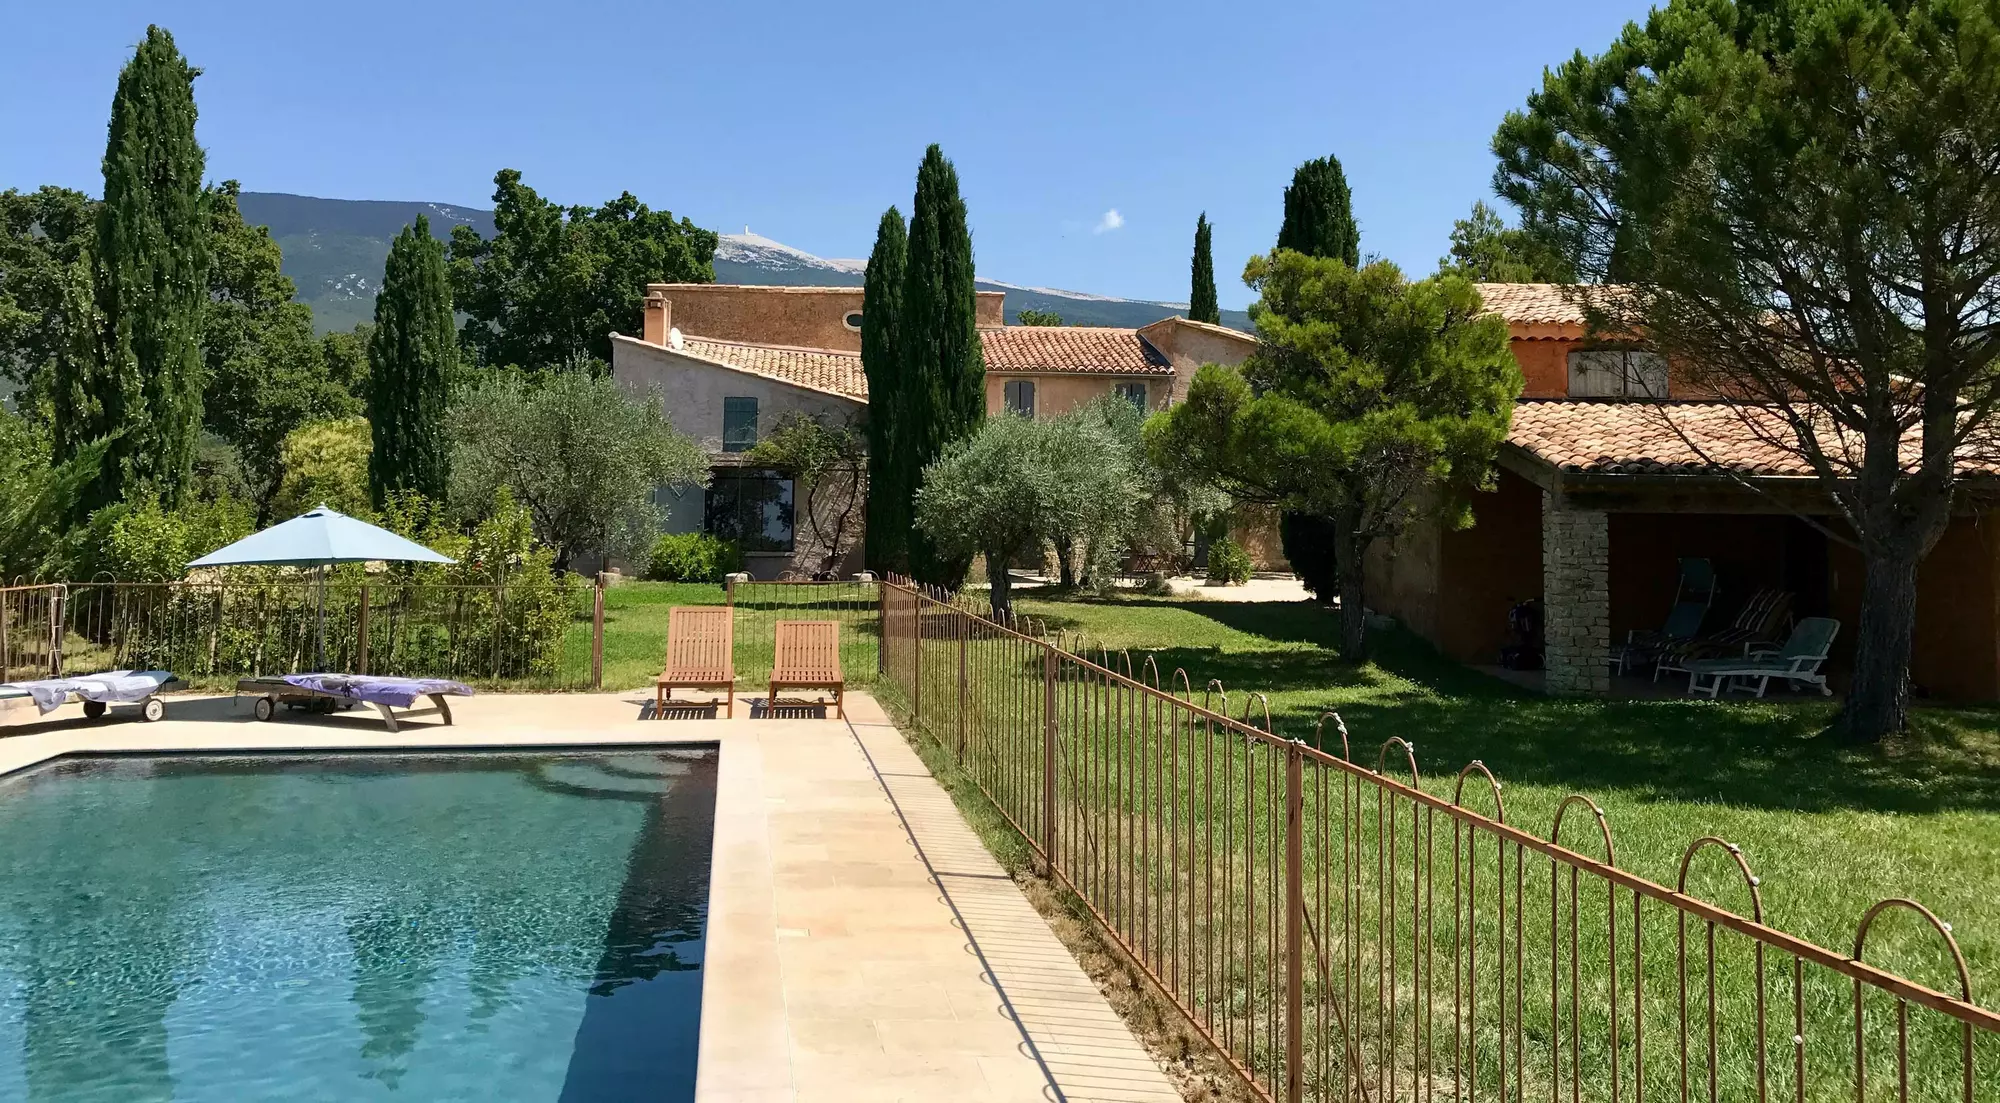 Provencal countryhouse with view of the Ventoux